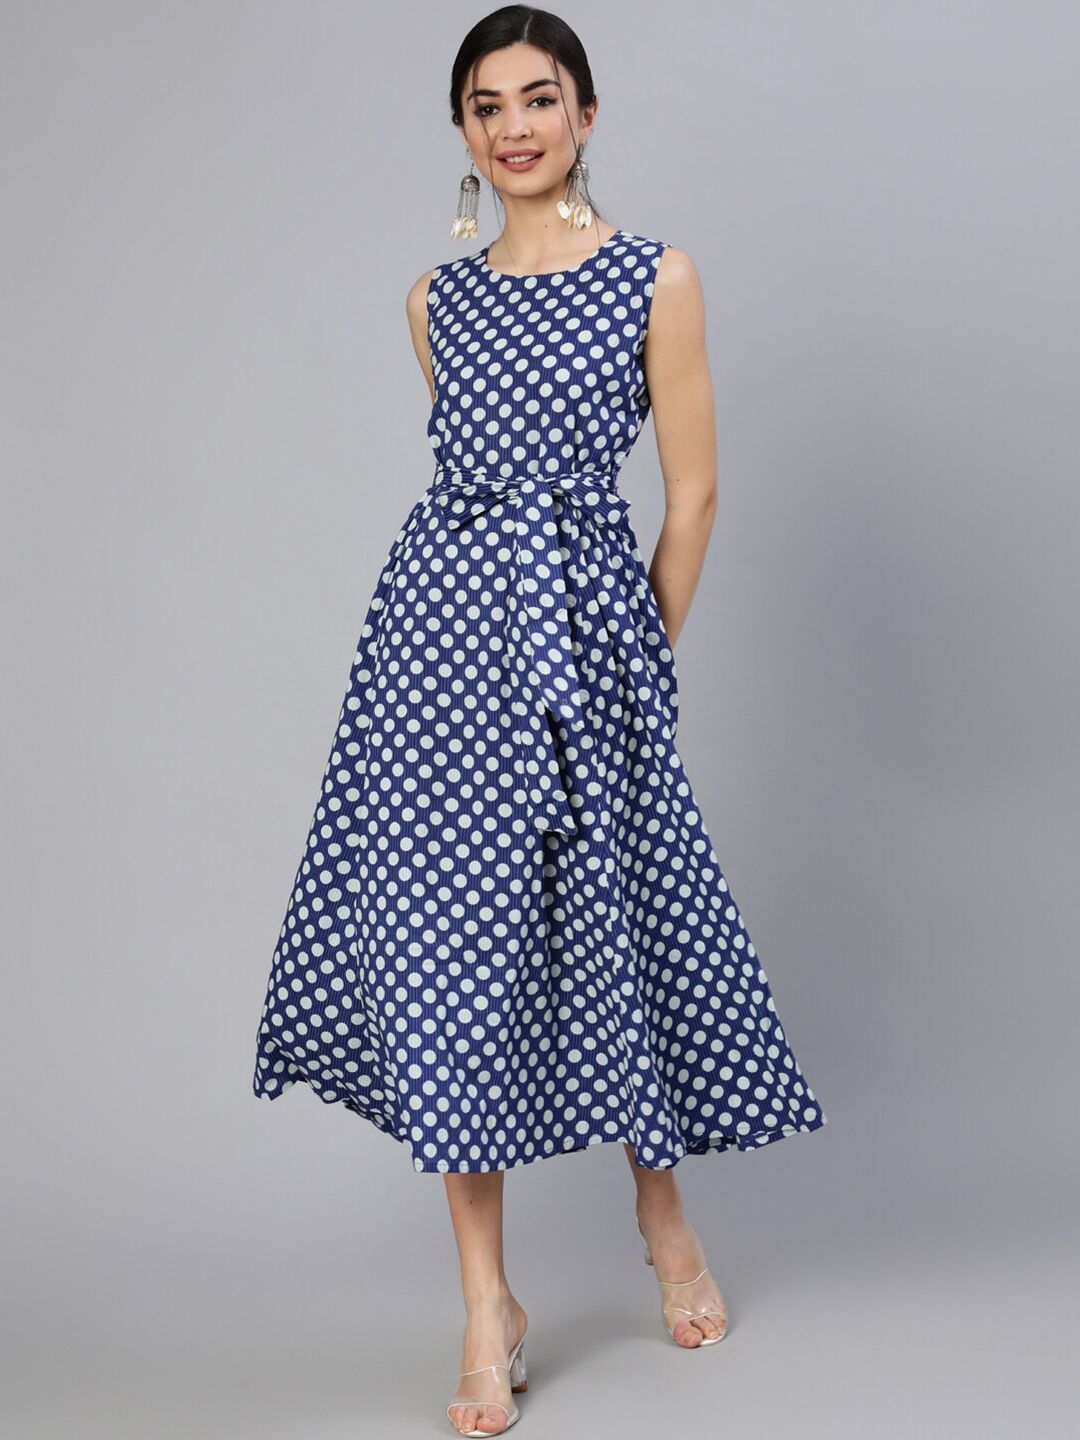 Nayo Women Blue Polka Dots Printed Cotton A-Line Dress Price in India